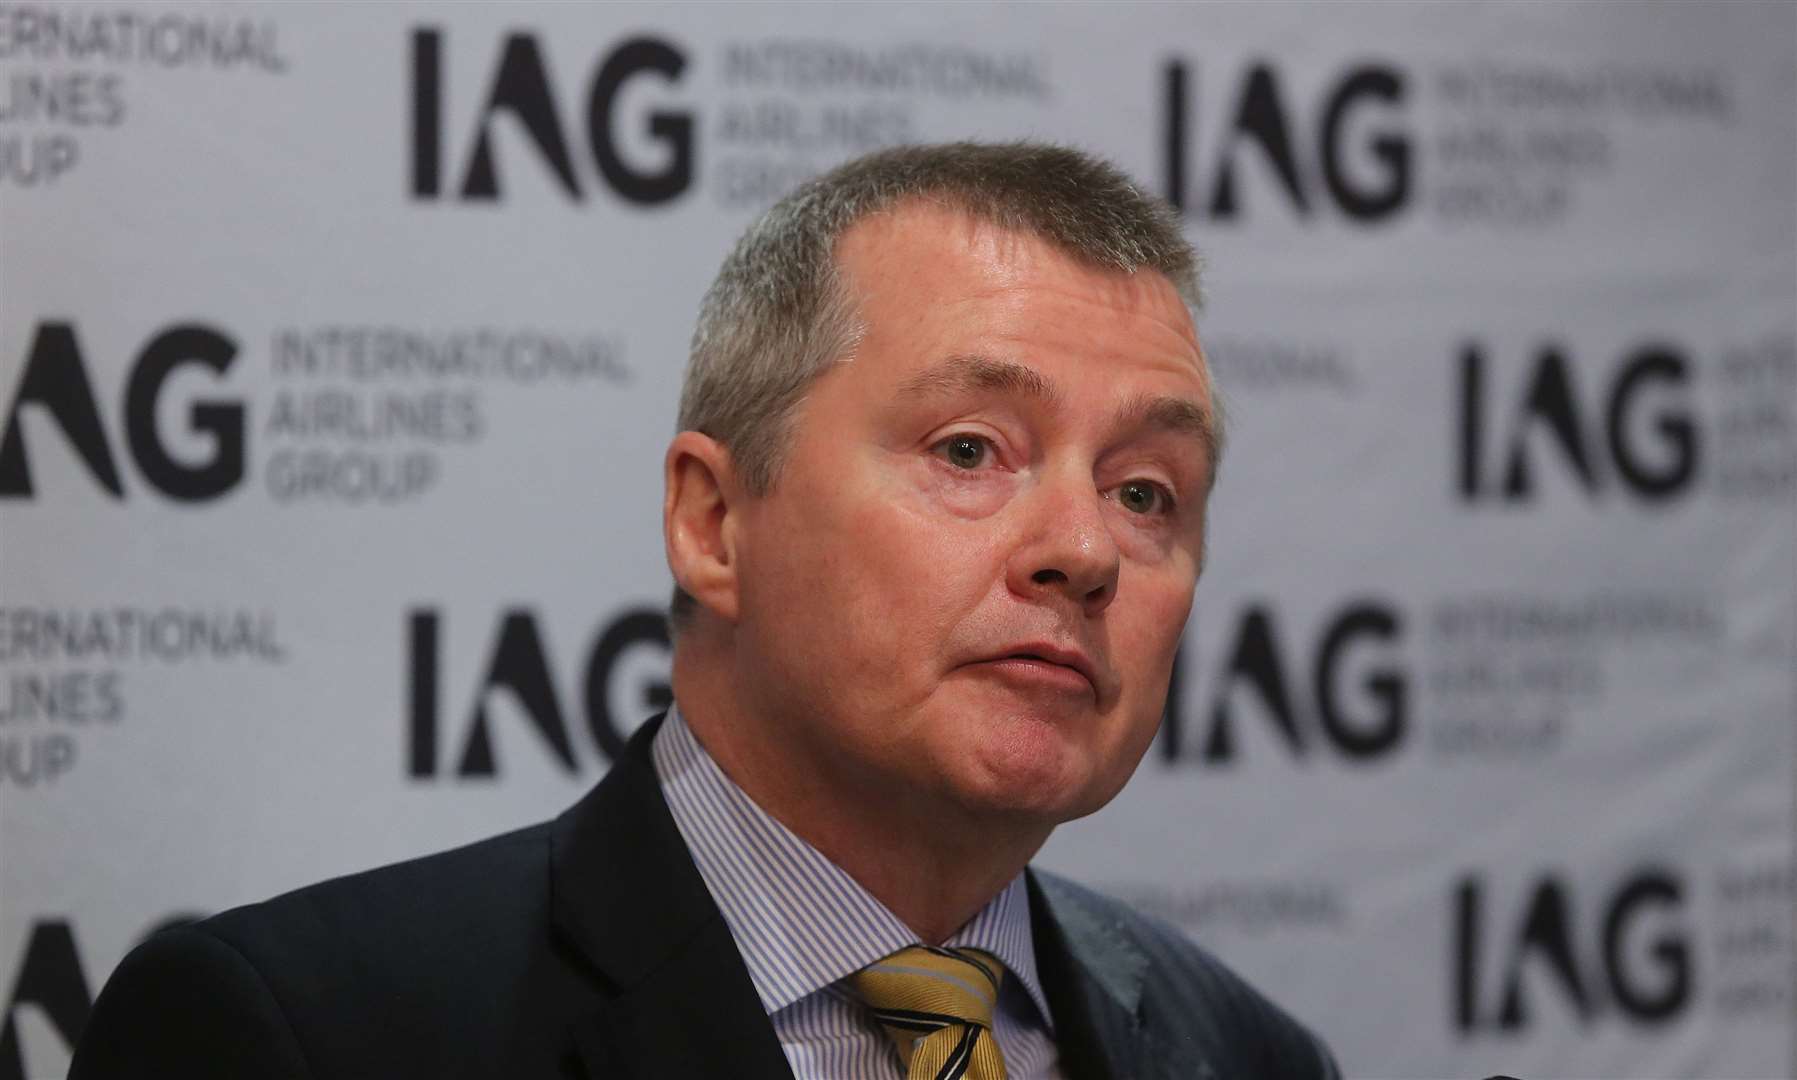 Aer Lingus is part of Willie Walsh’s International Airlines Group (Niall Carson/PA)